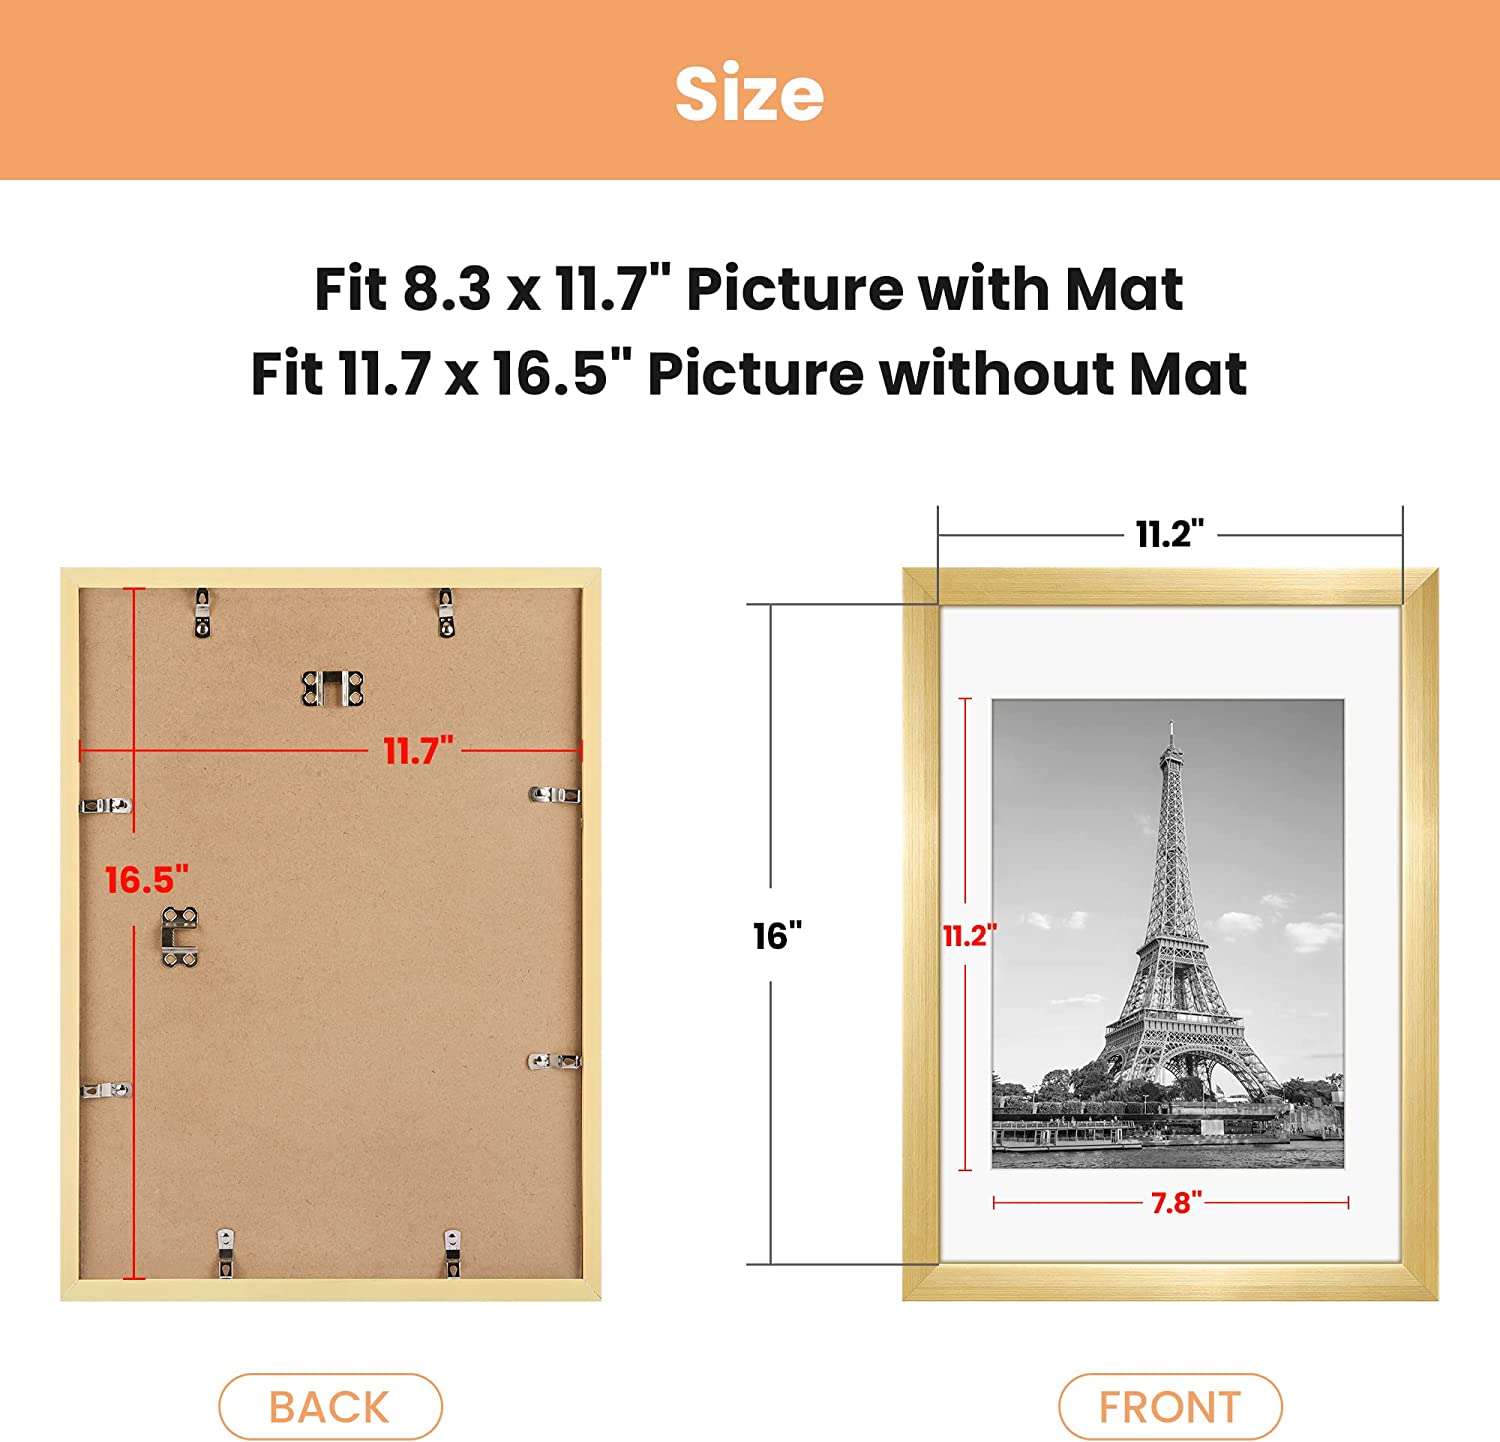 upsimples 12x16 Picture Frame Set of 5,Display Pictures 8.5x11 with Ma –  Upsimples Direct